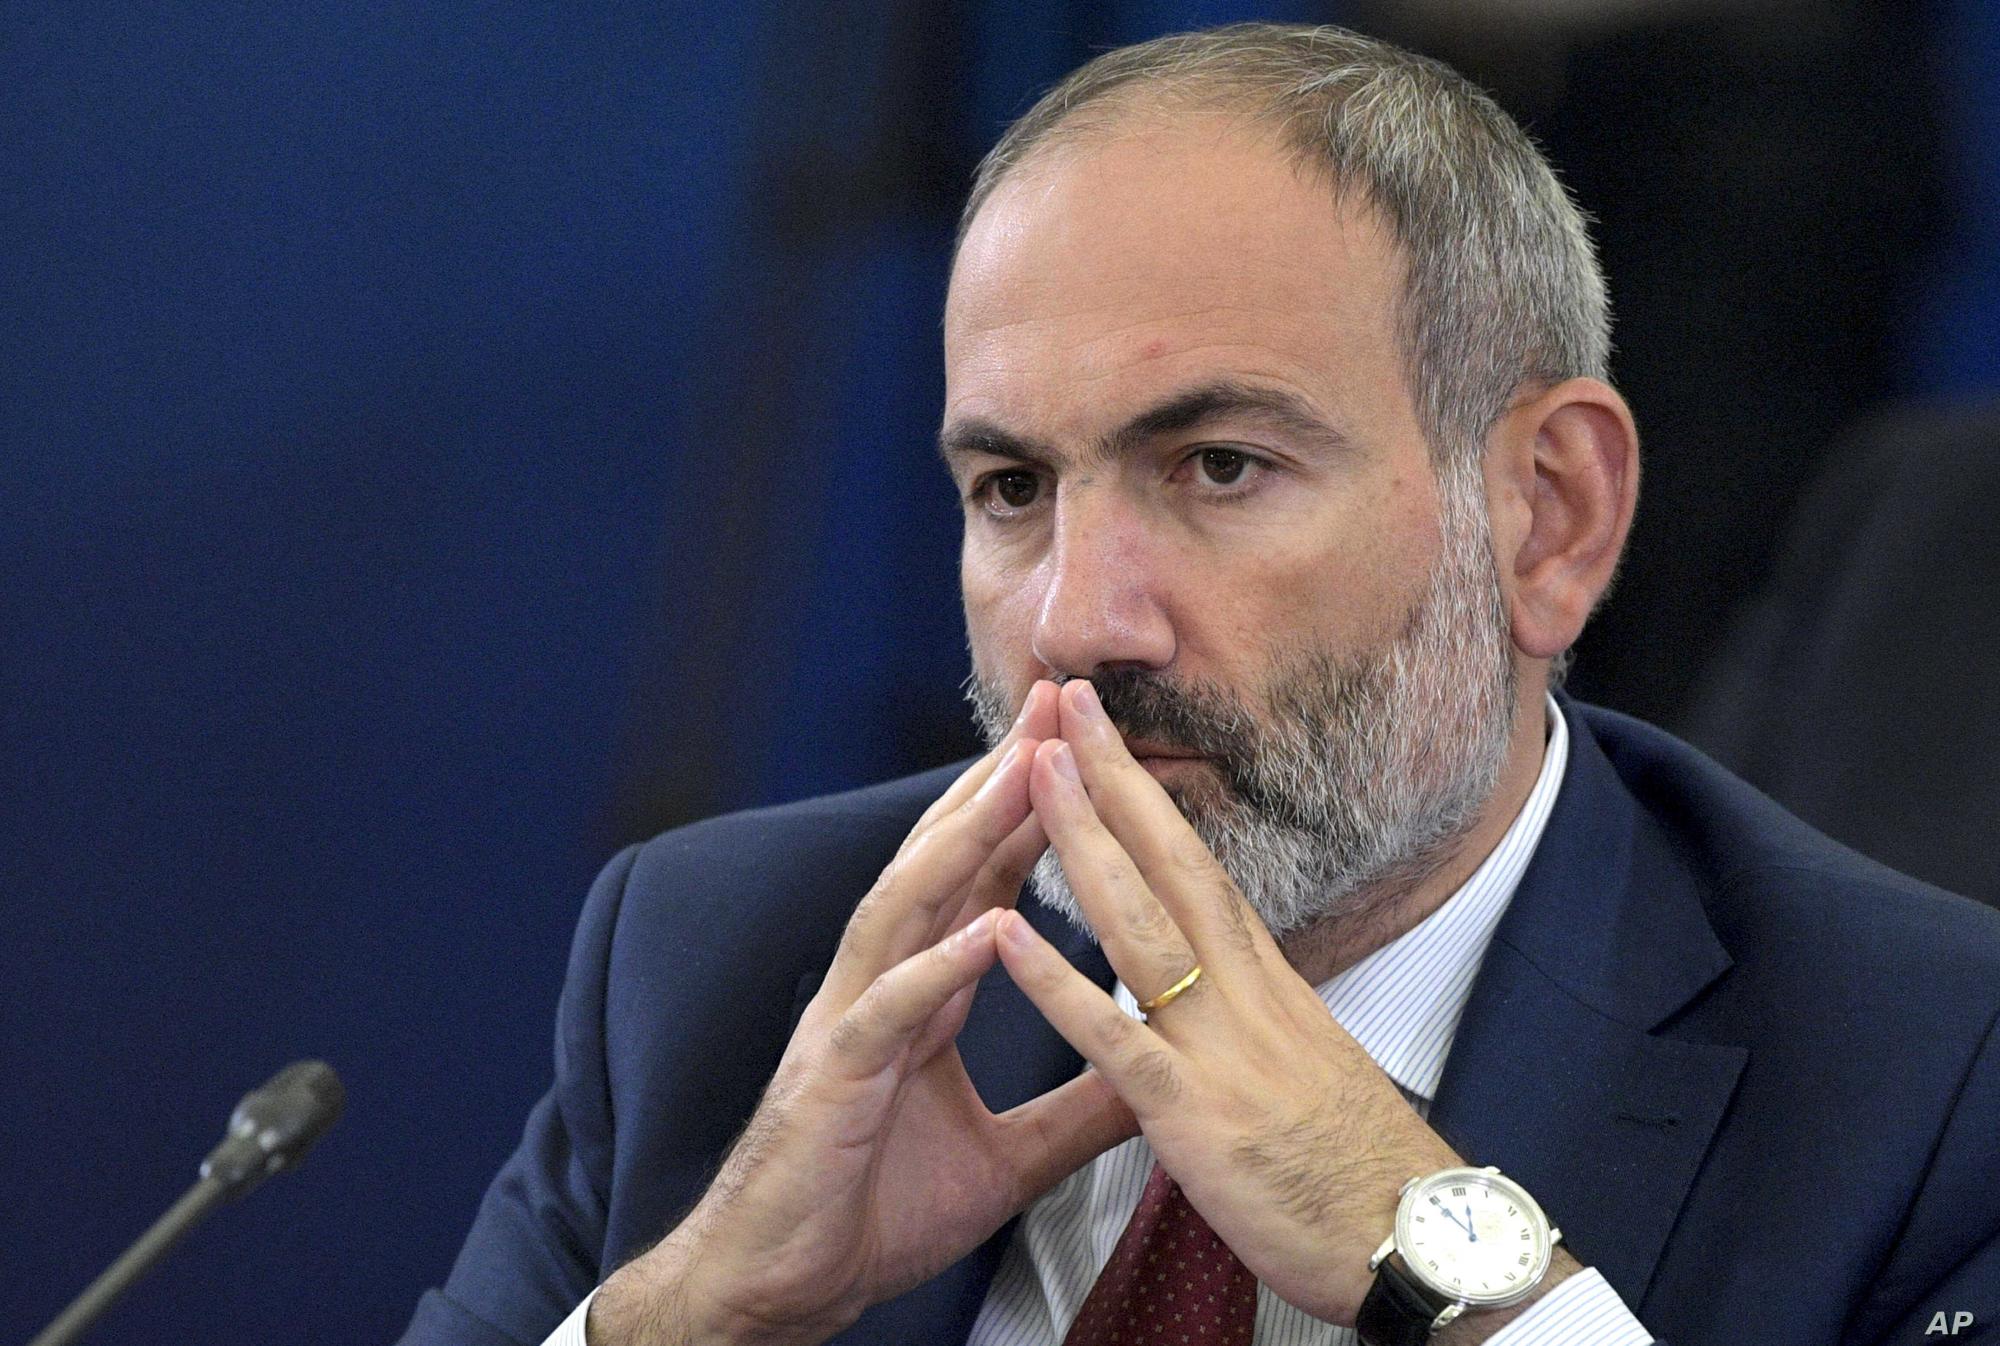 “I have signed a statement with Russia, Azerbaijan”, Pashinyan